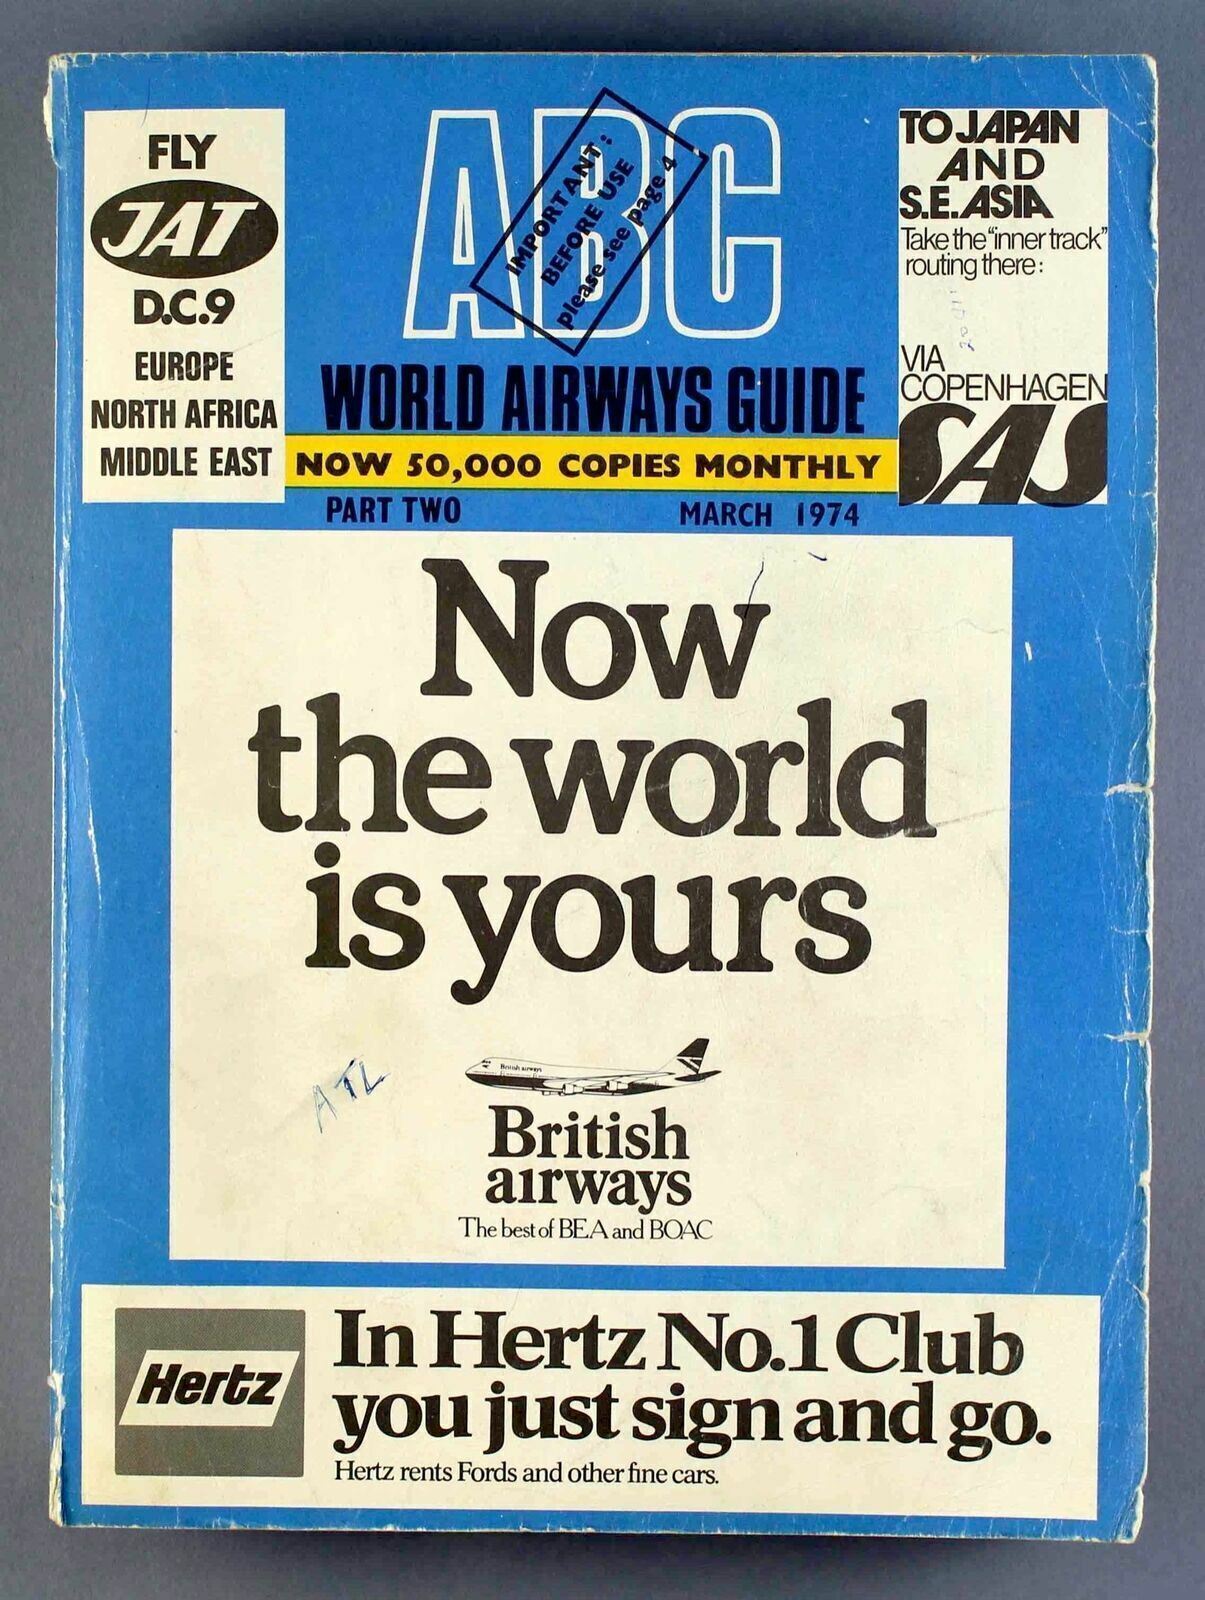 ABC WORLD AIRWAYS GUIDE MARCH 1974 AIRLINE TIMETABLE PART TWO BLUE BOOK UTA MEA